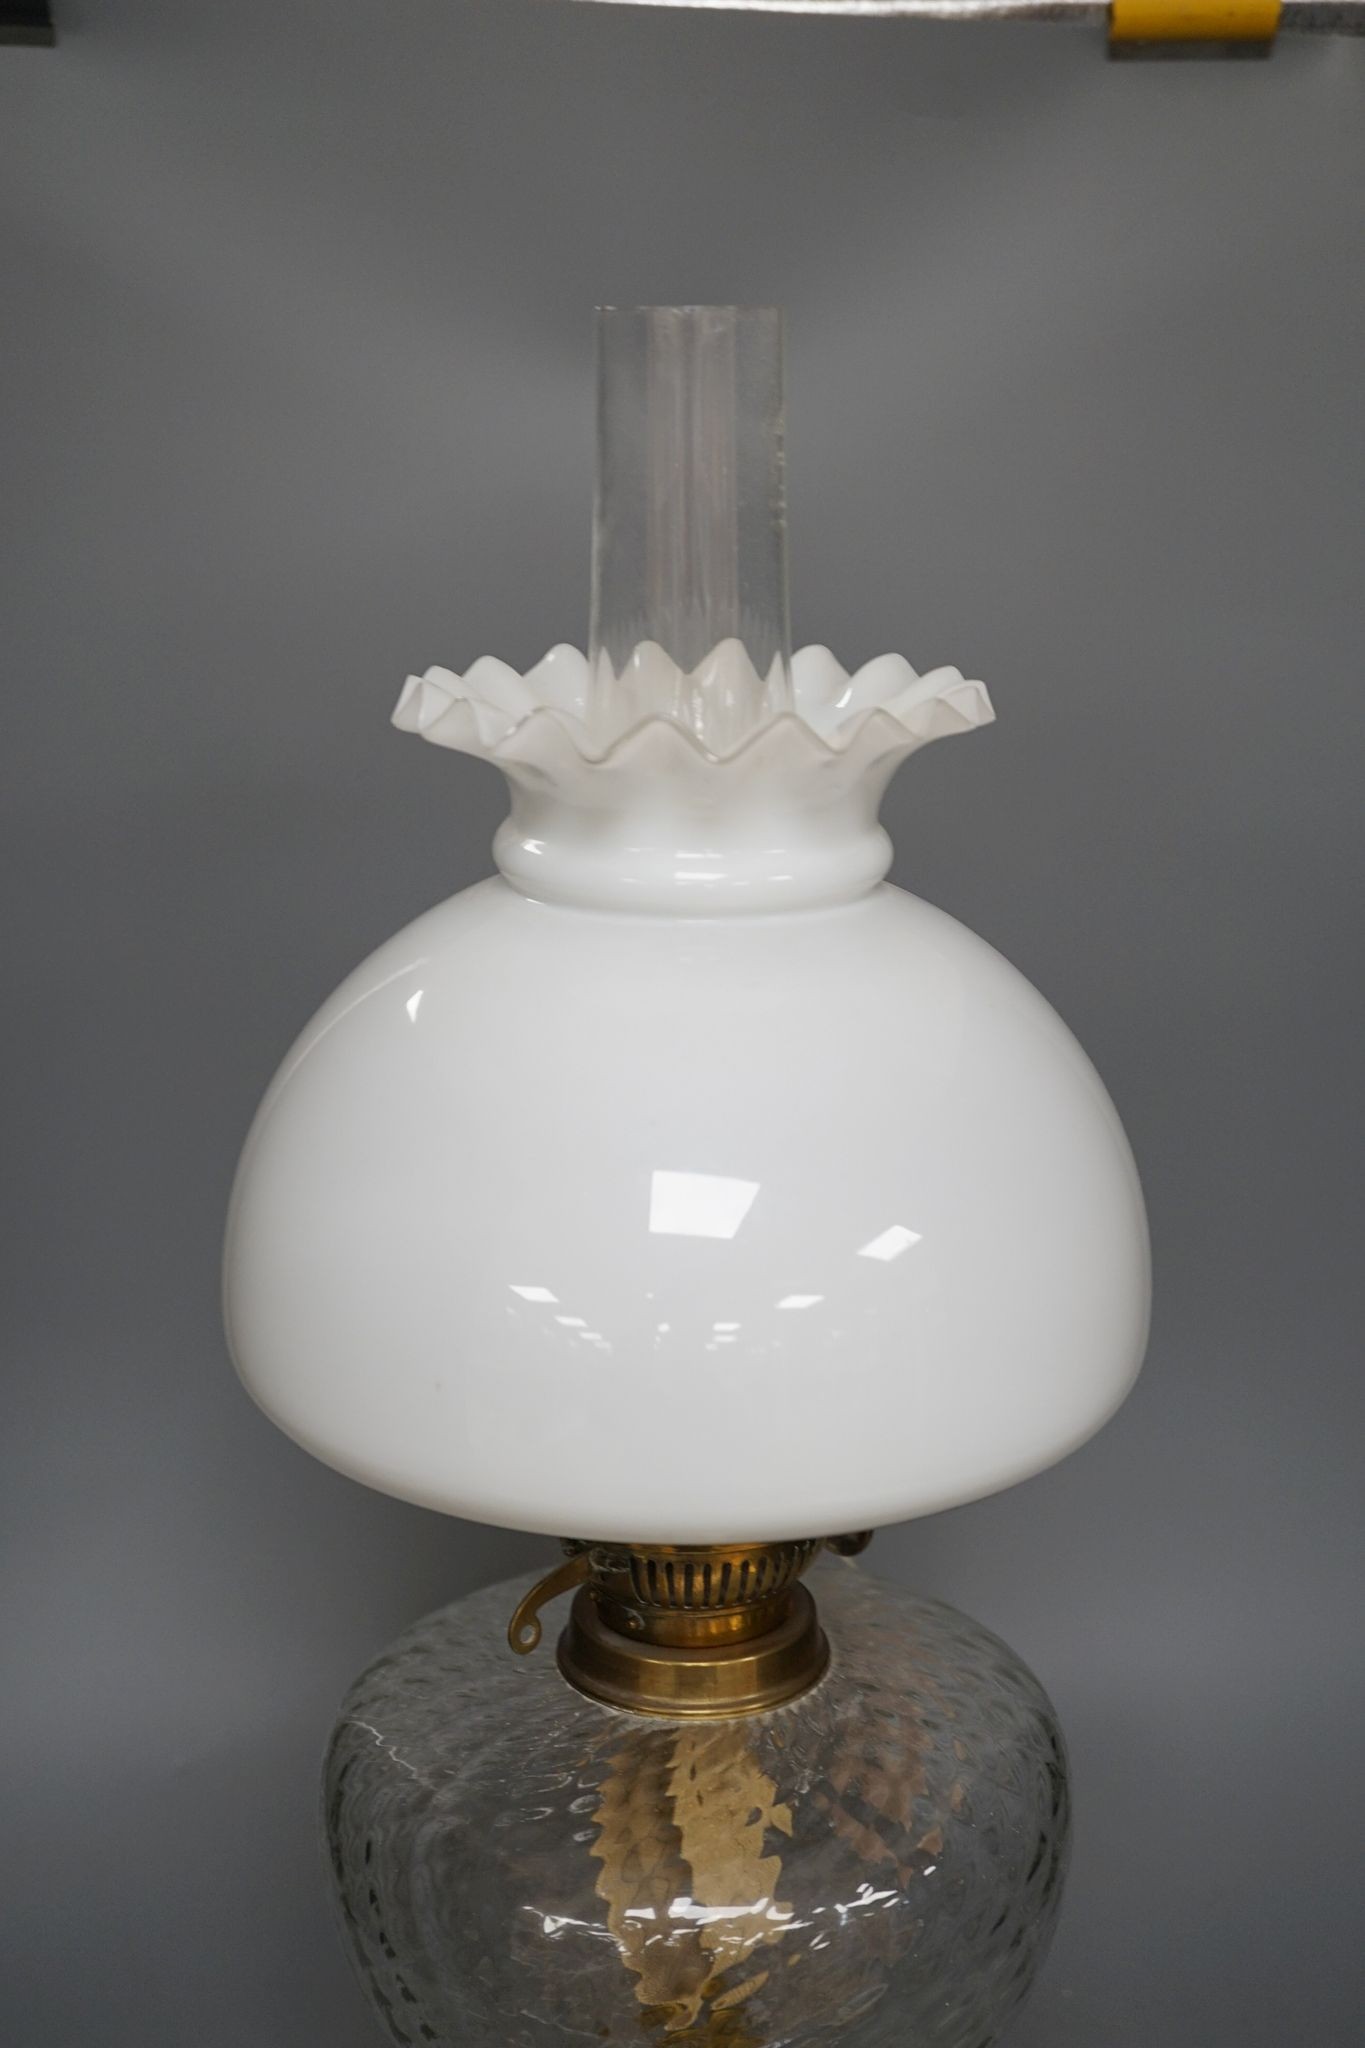 A brass oil lamp with opaque shade 60cm total height